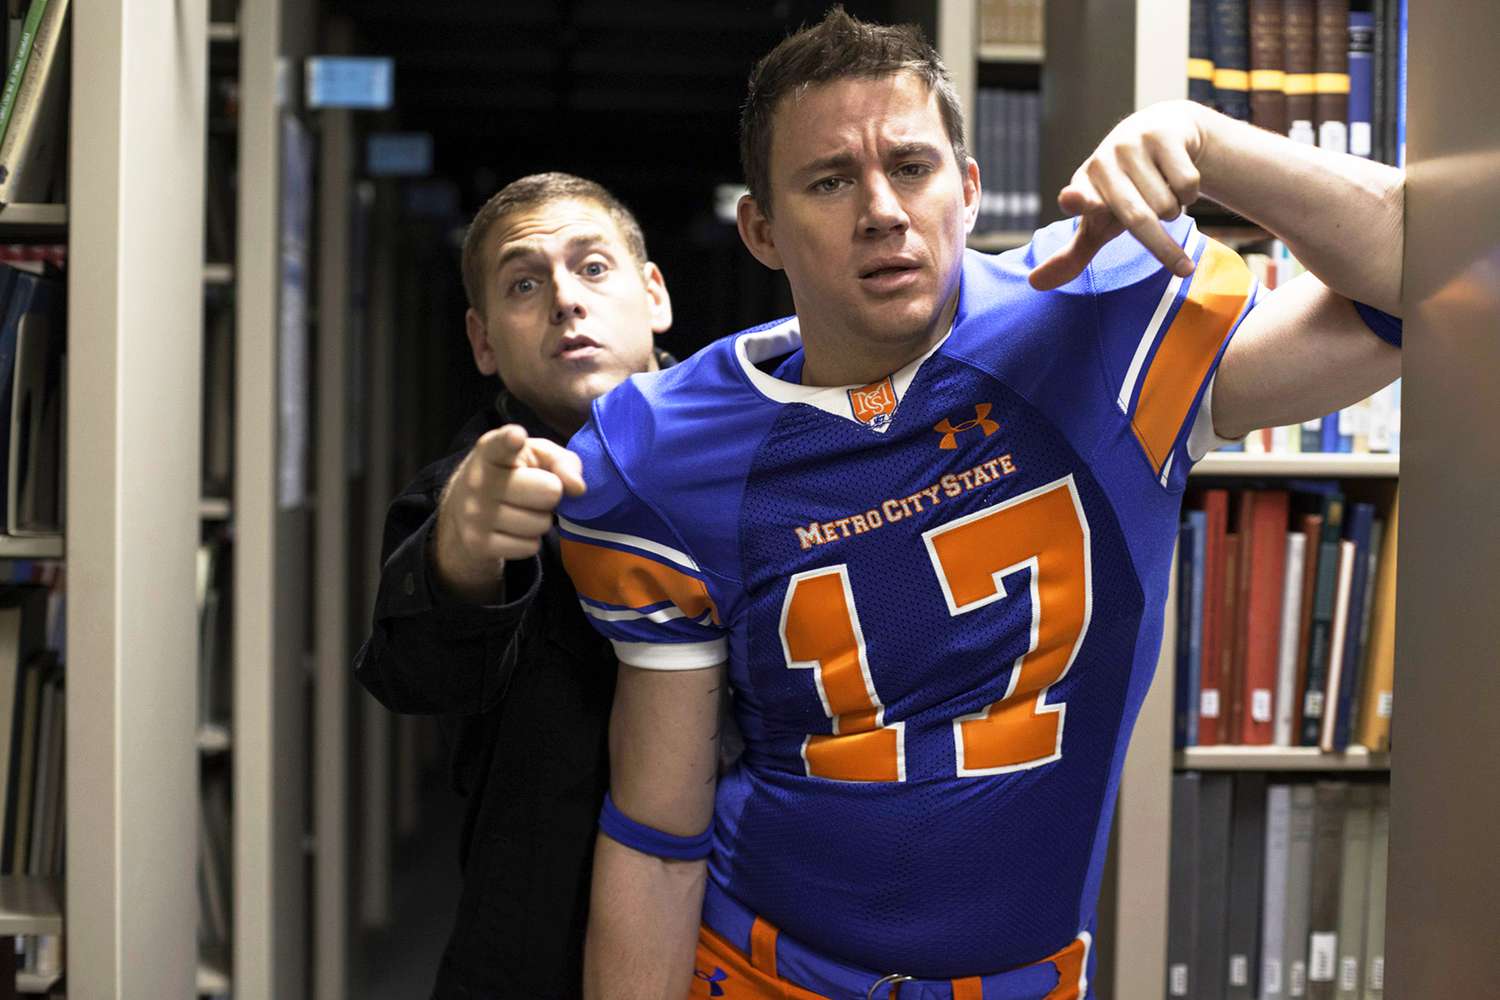 Channing Tatum still wants to make '23 Jump Street' with Jonah Hill: ‘We’ve been trying to get it done’